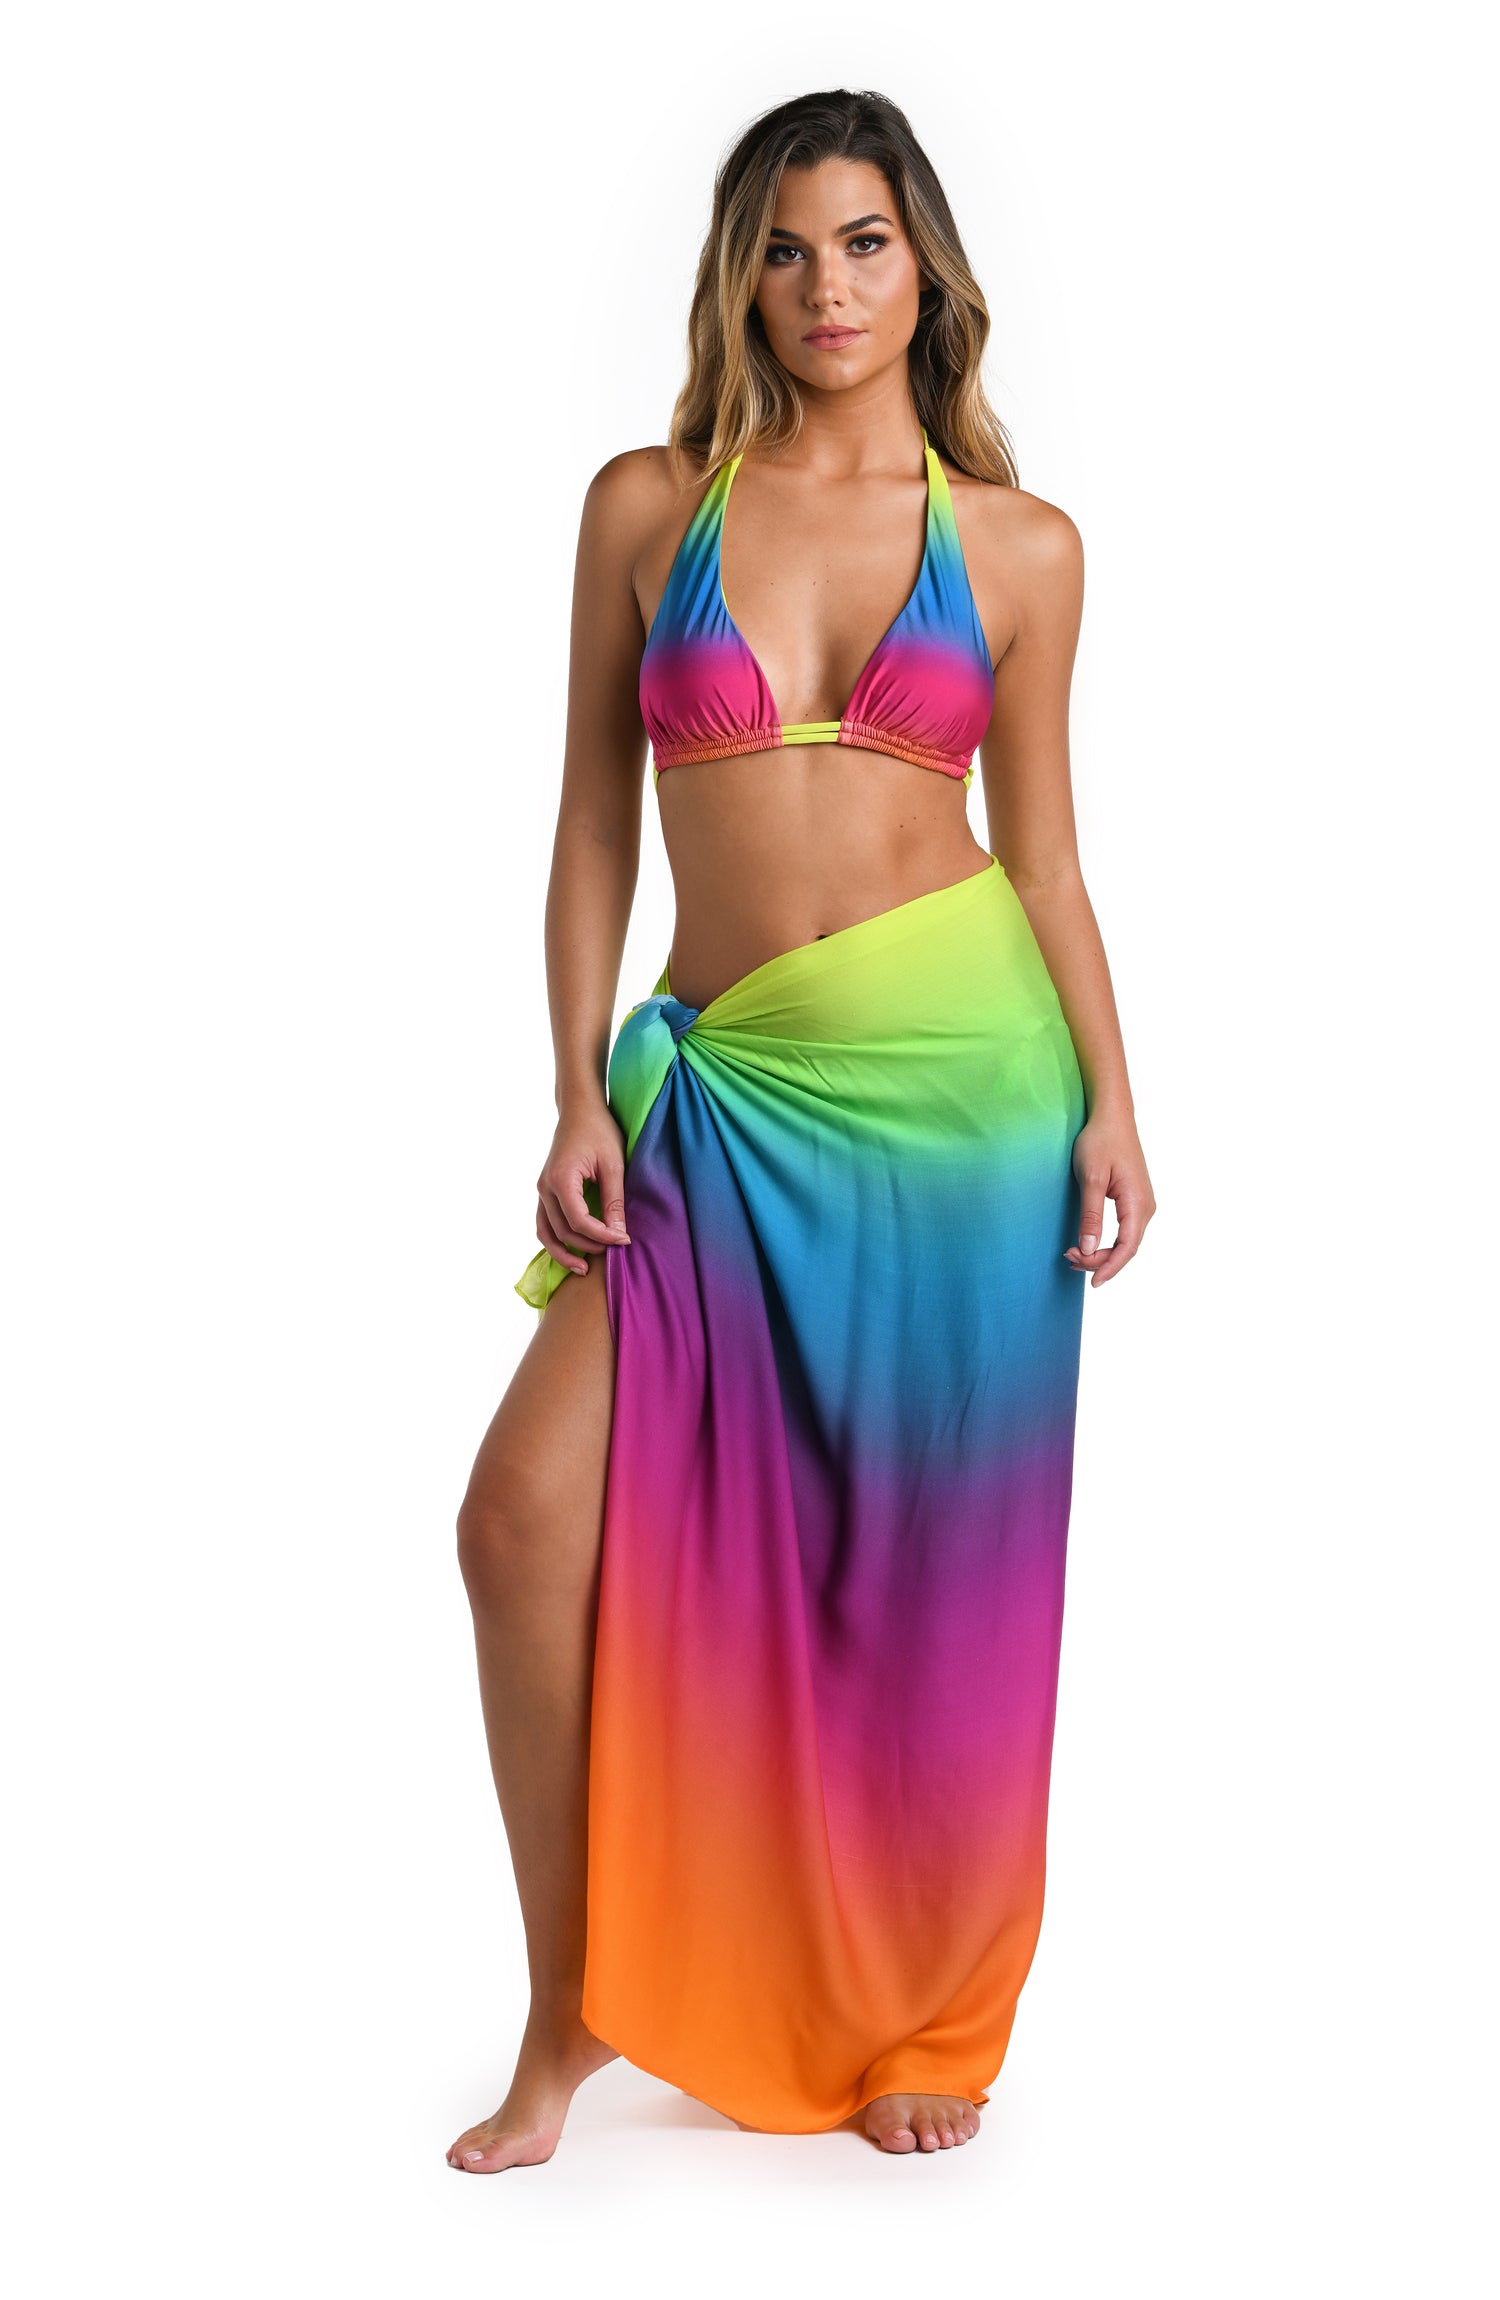 Model is wearing a multicolored Pareo Wrap Swimsuit Cover Up